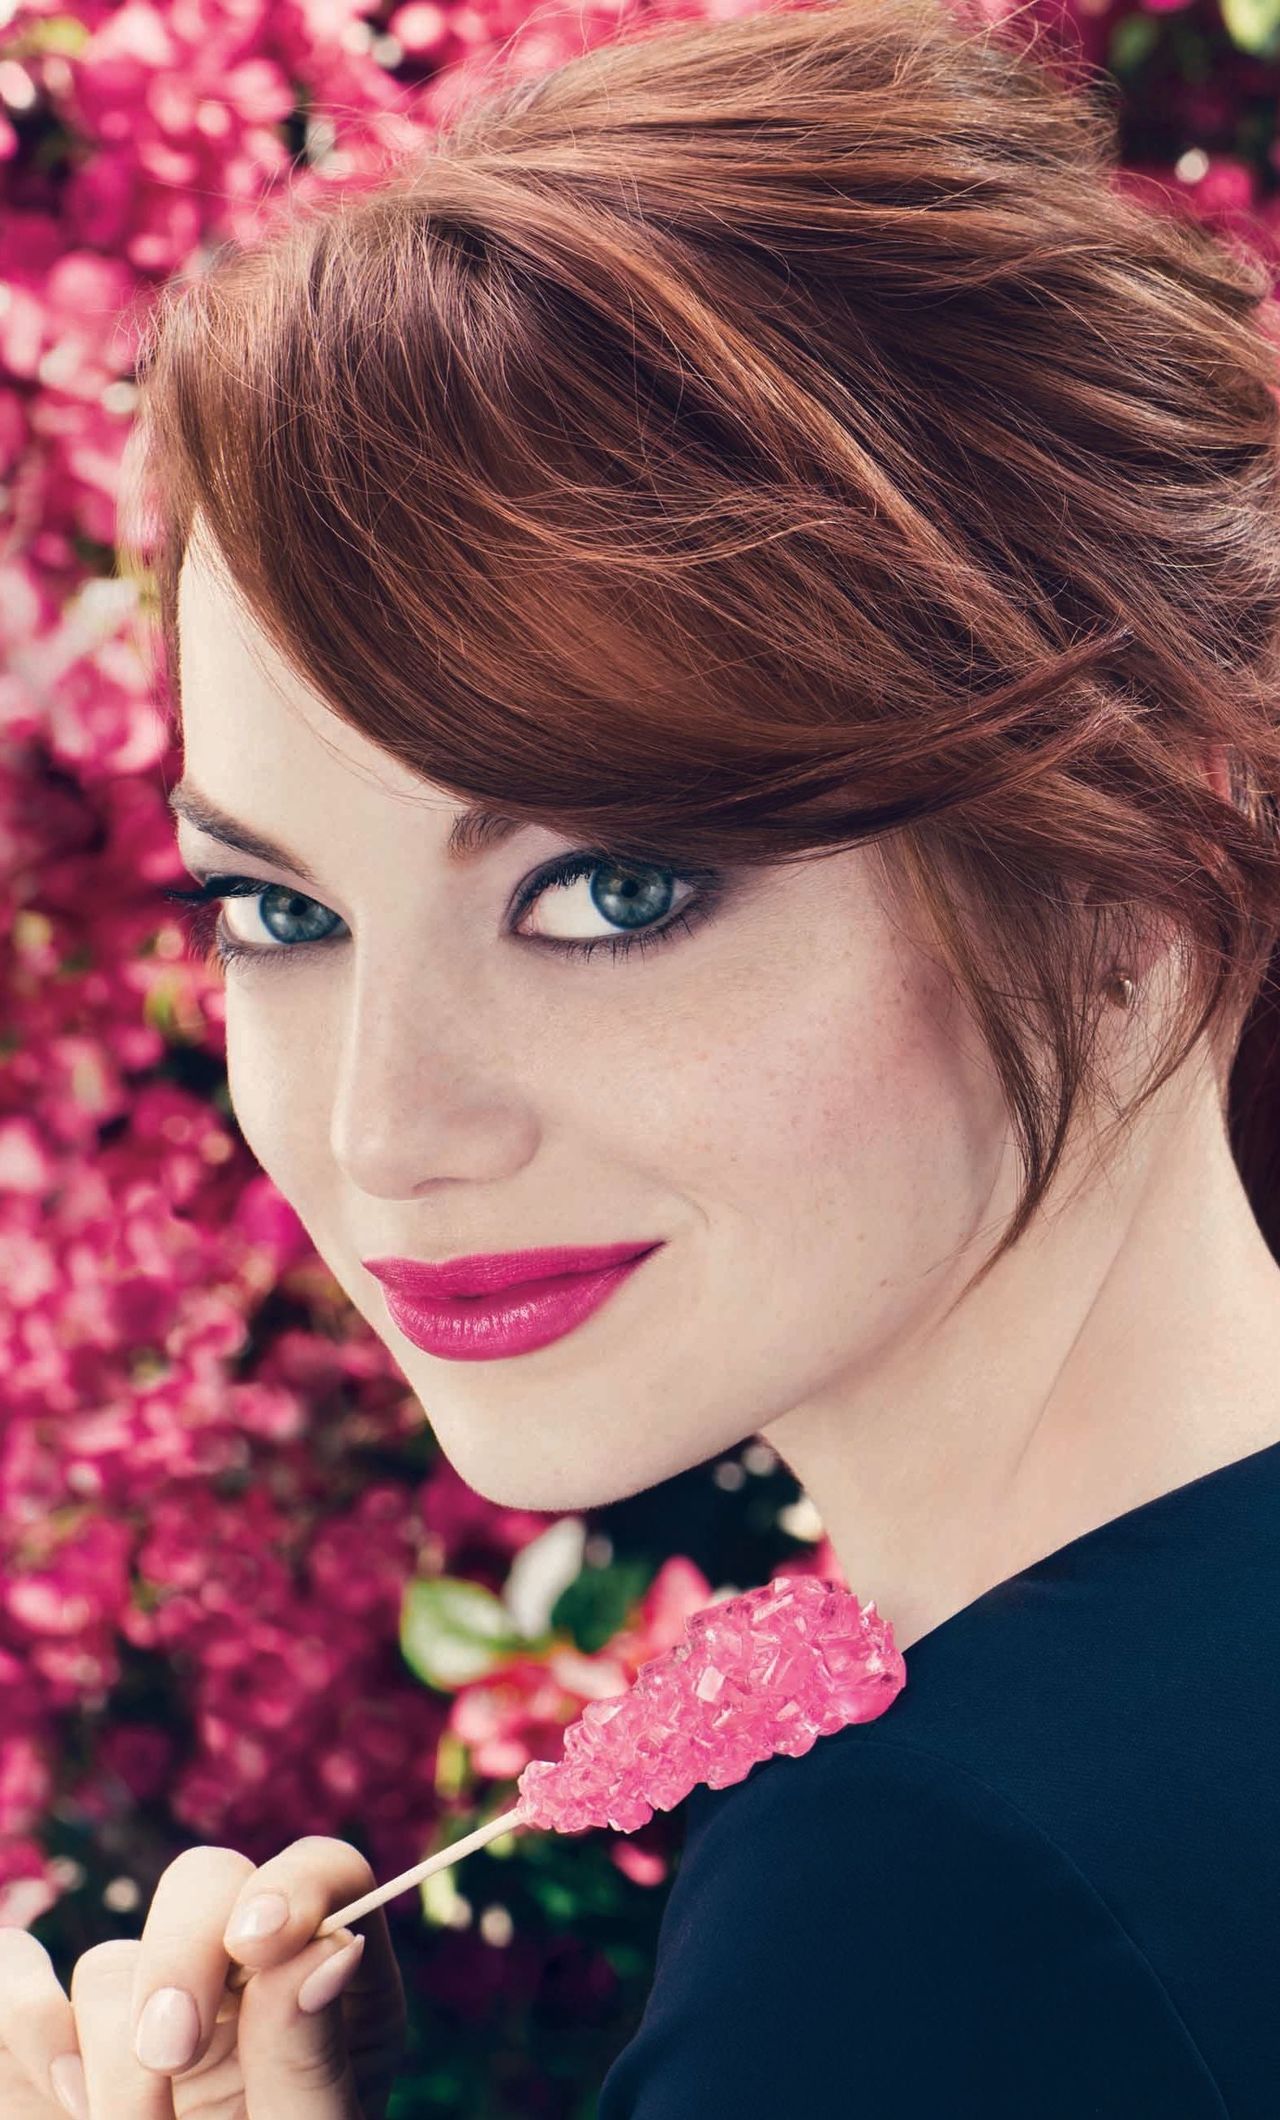 2017 Emma Stone Iphone 6 Hd 4k Wallpapers Images - Famous Celebrities In Advertisements , HD Wallpaper & Backgrounds